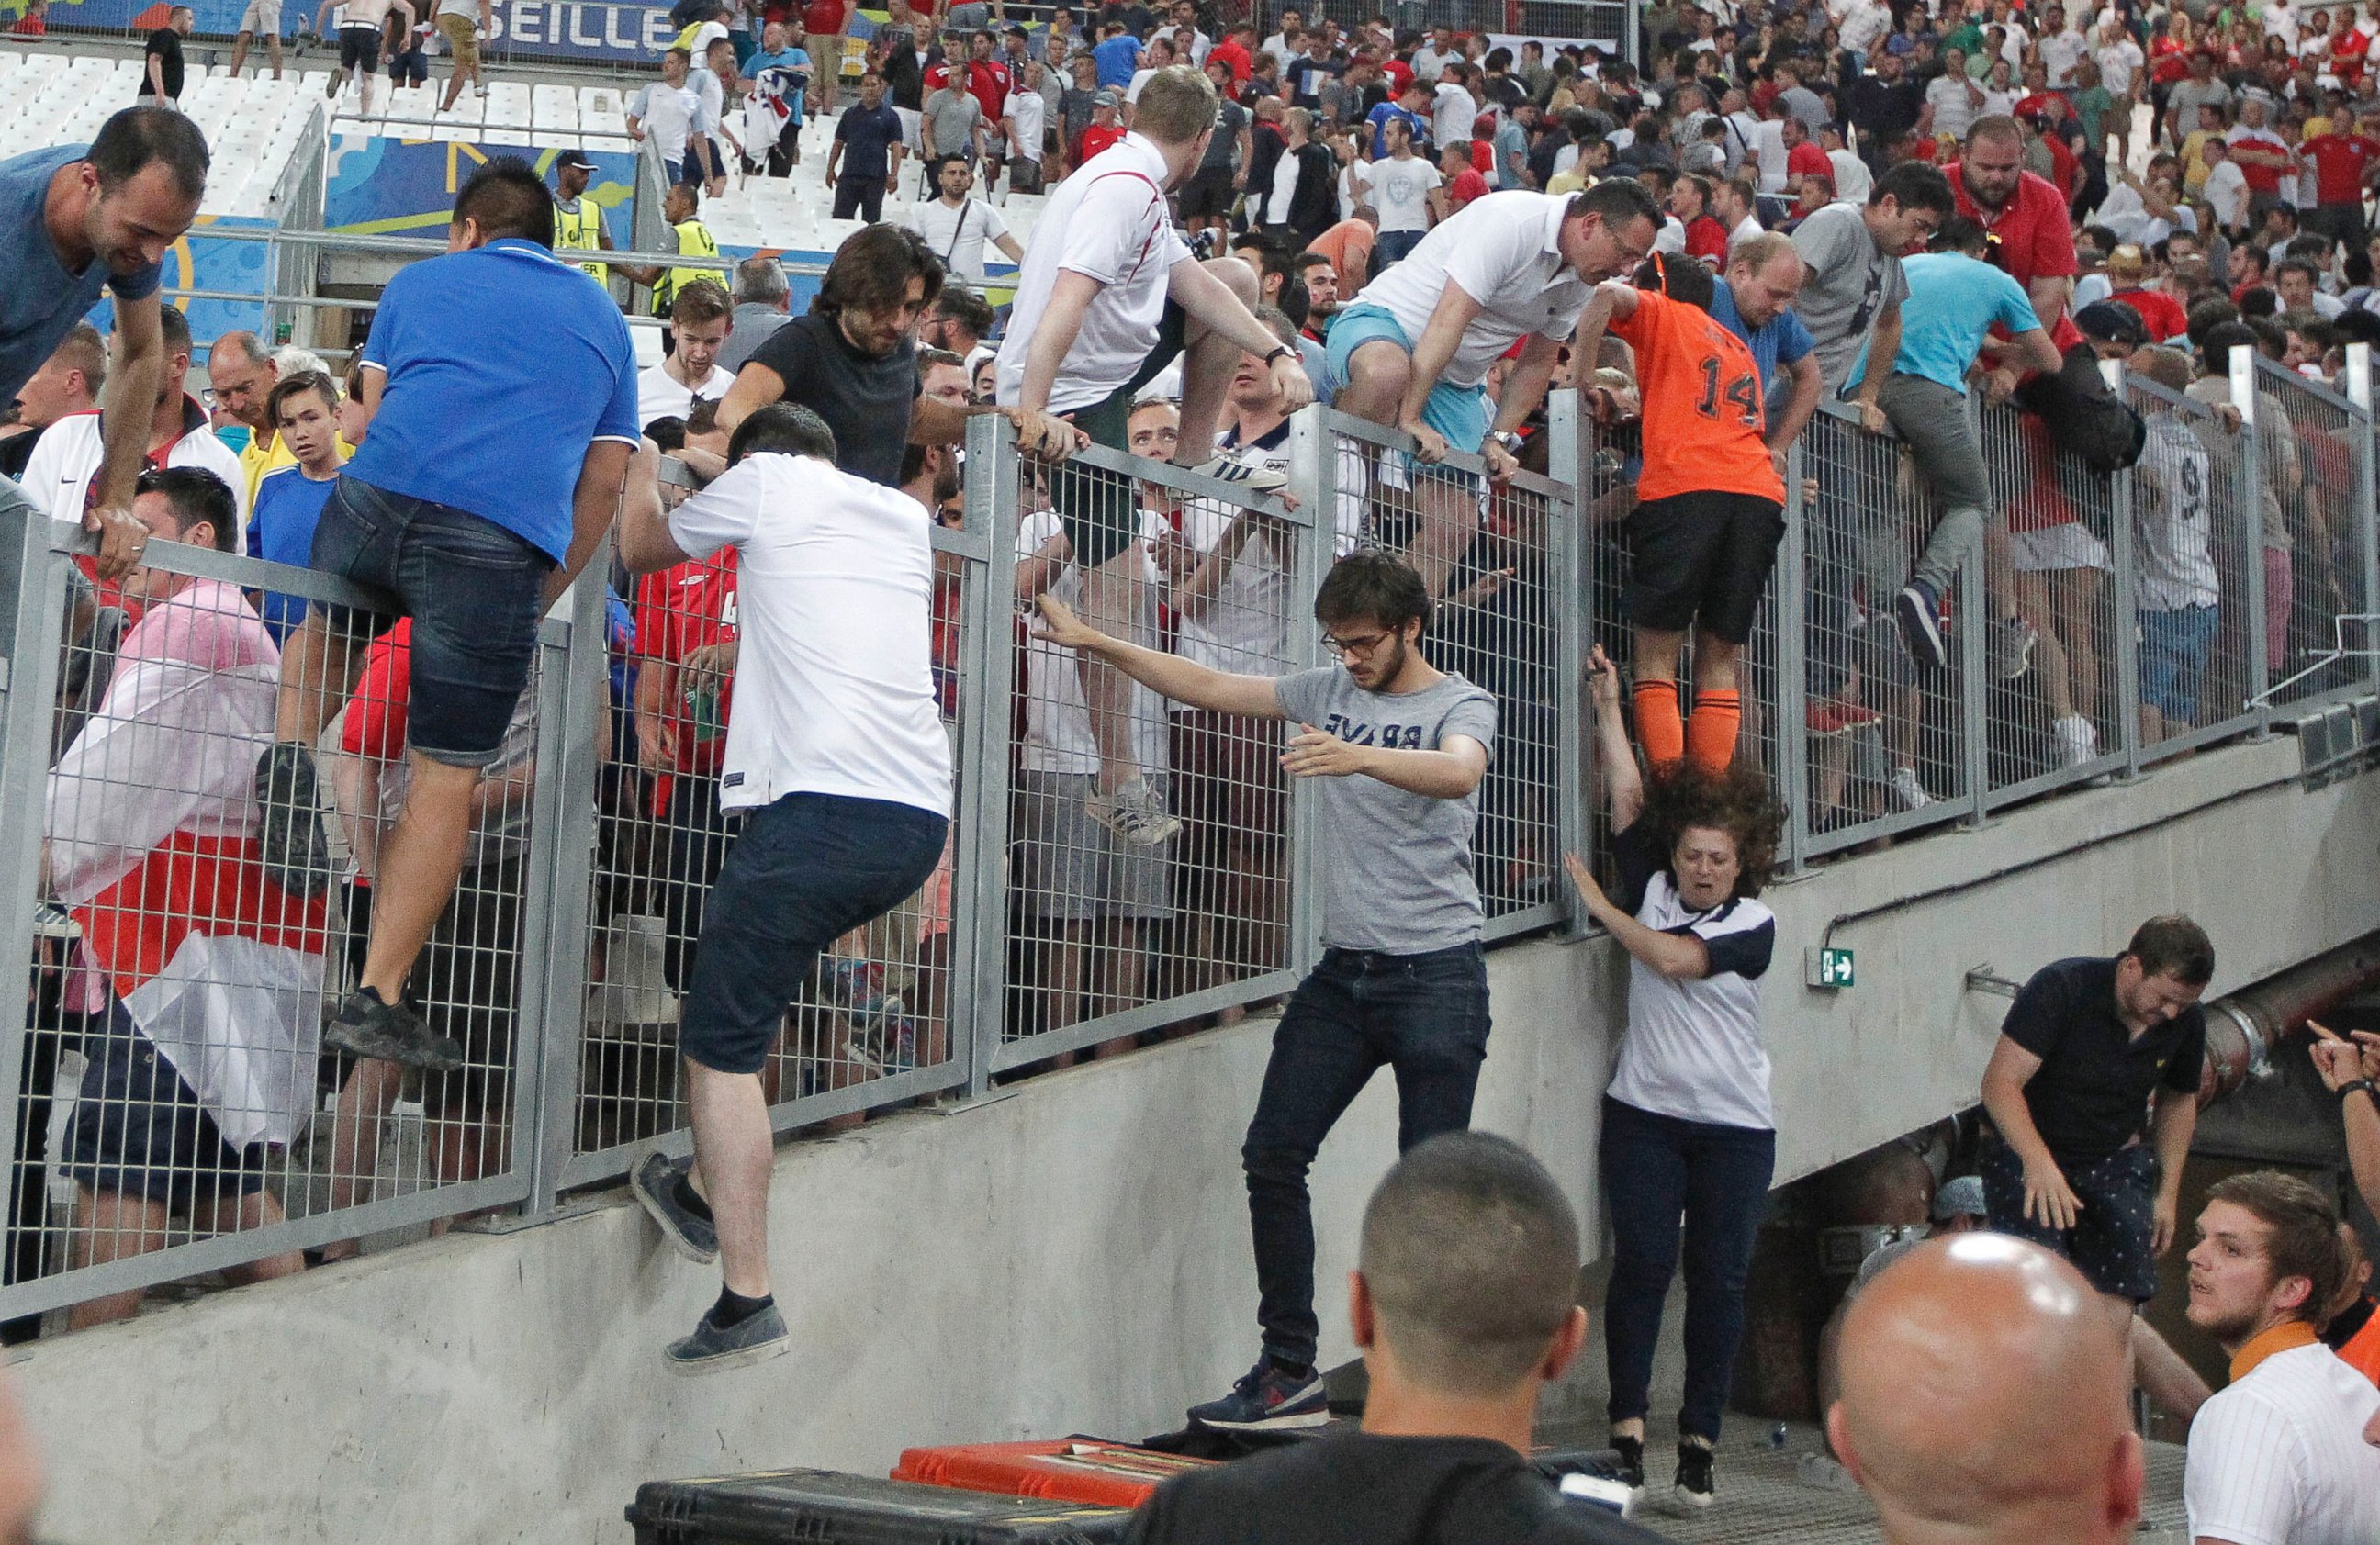 PHOTO: Spectators try to escape from Russian supporters who went on a charge in the stands right after the Euro 2016 Group B soccer match between England and Russia, at the Velodrome stadium in Marseille, France, June 11, 2016.